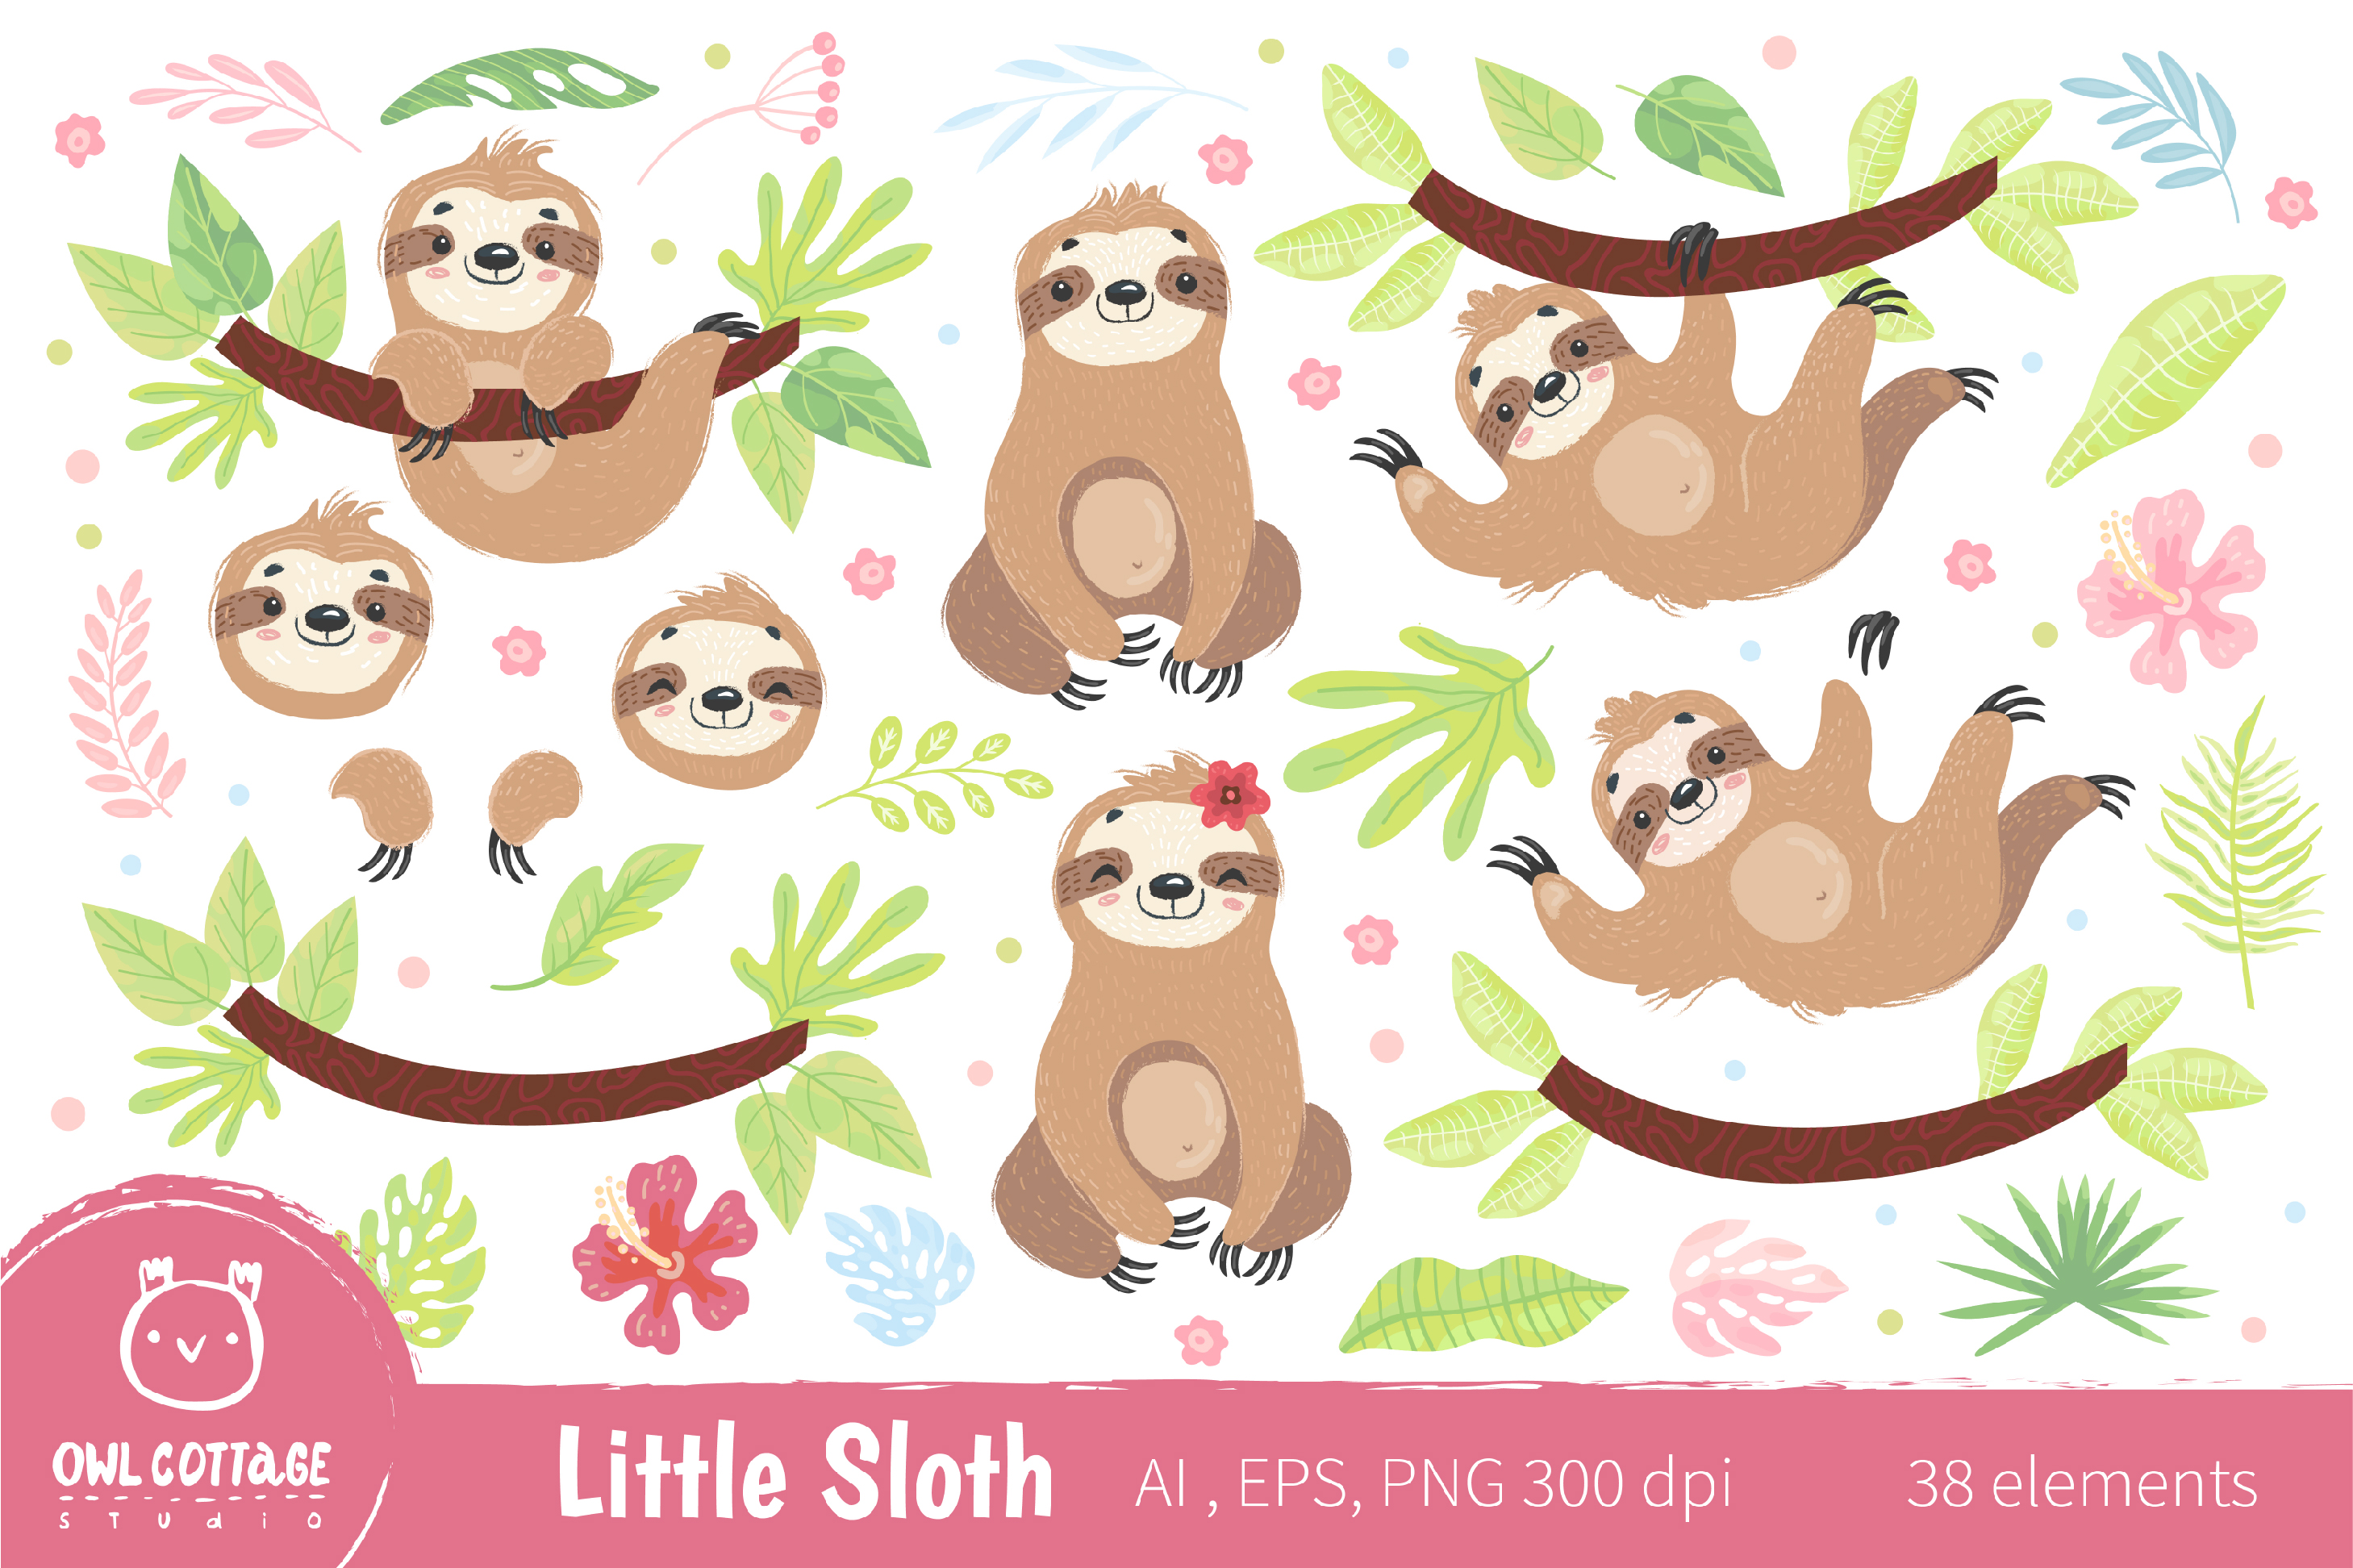 Cute Sloth Clipart Collection, Vector and Png, Easy SCALABLE.